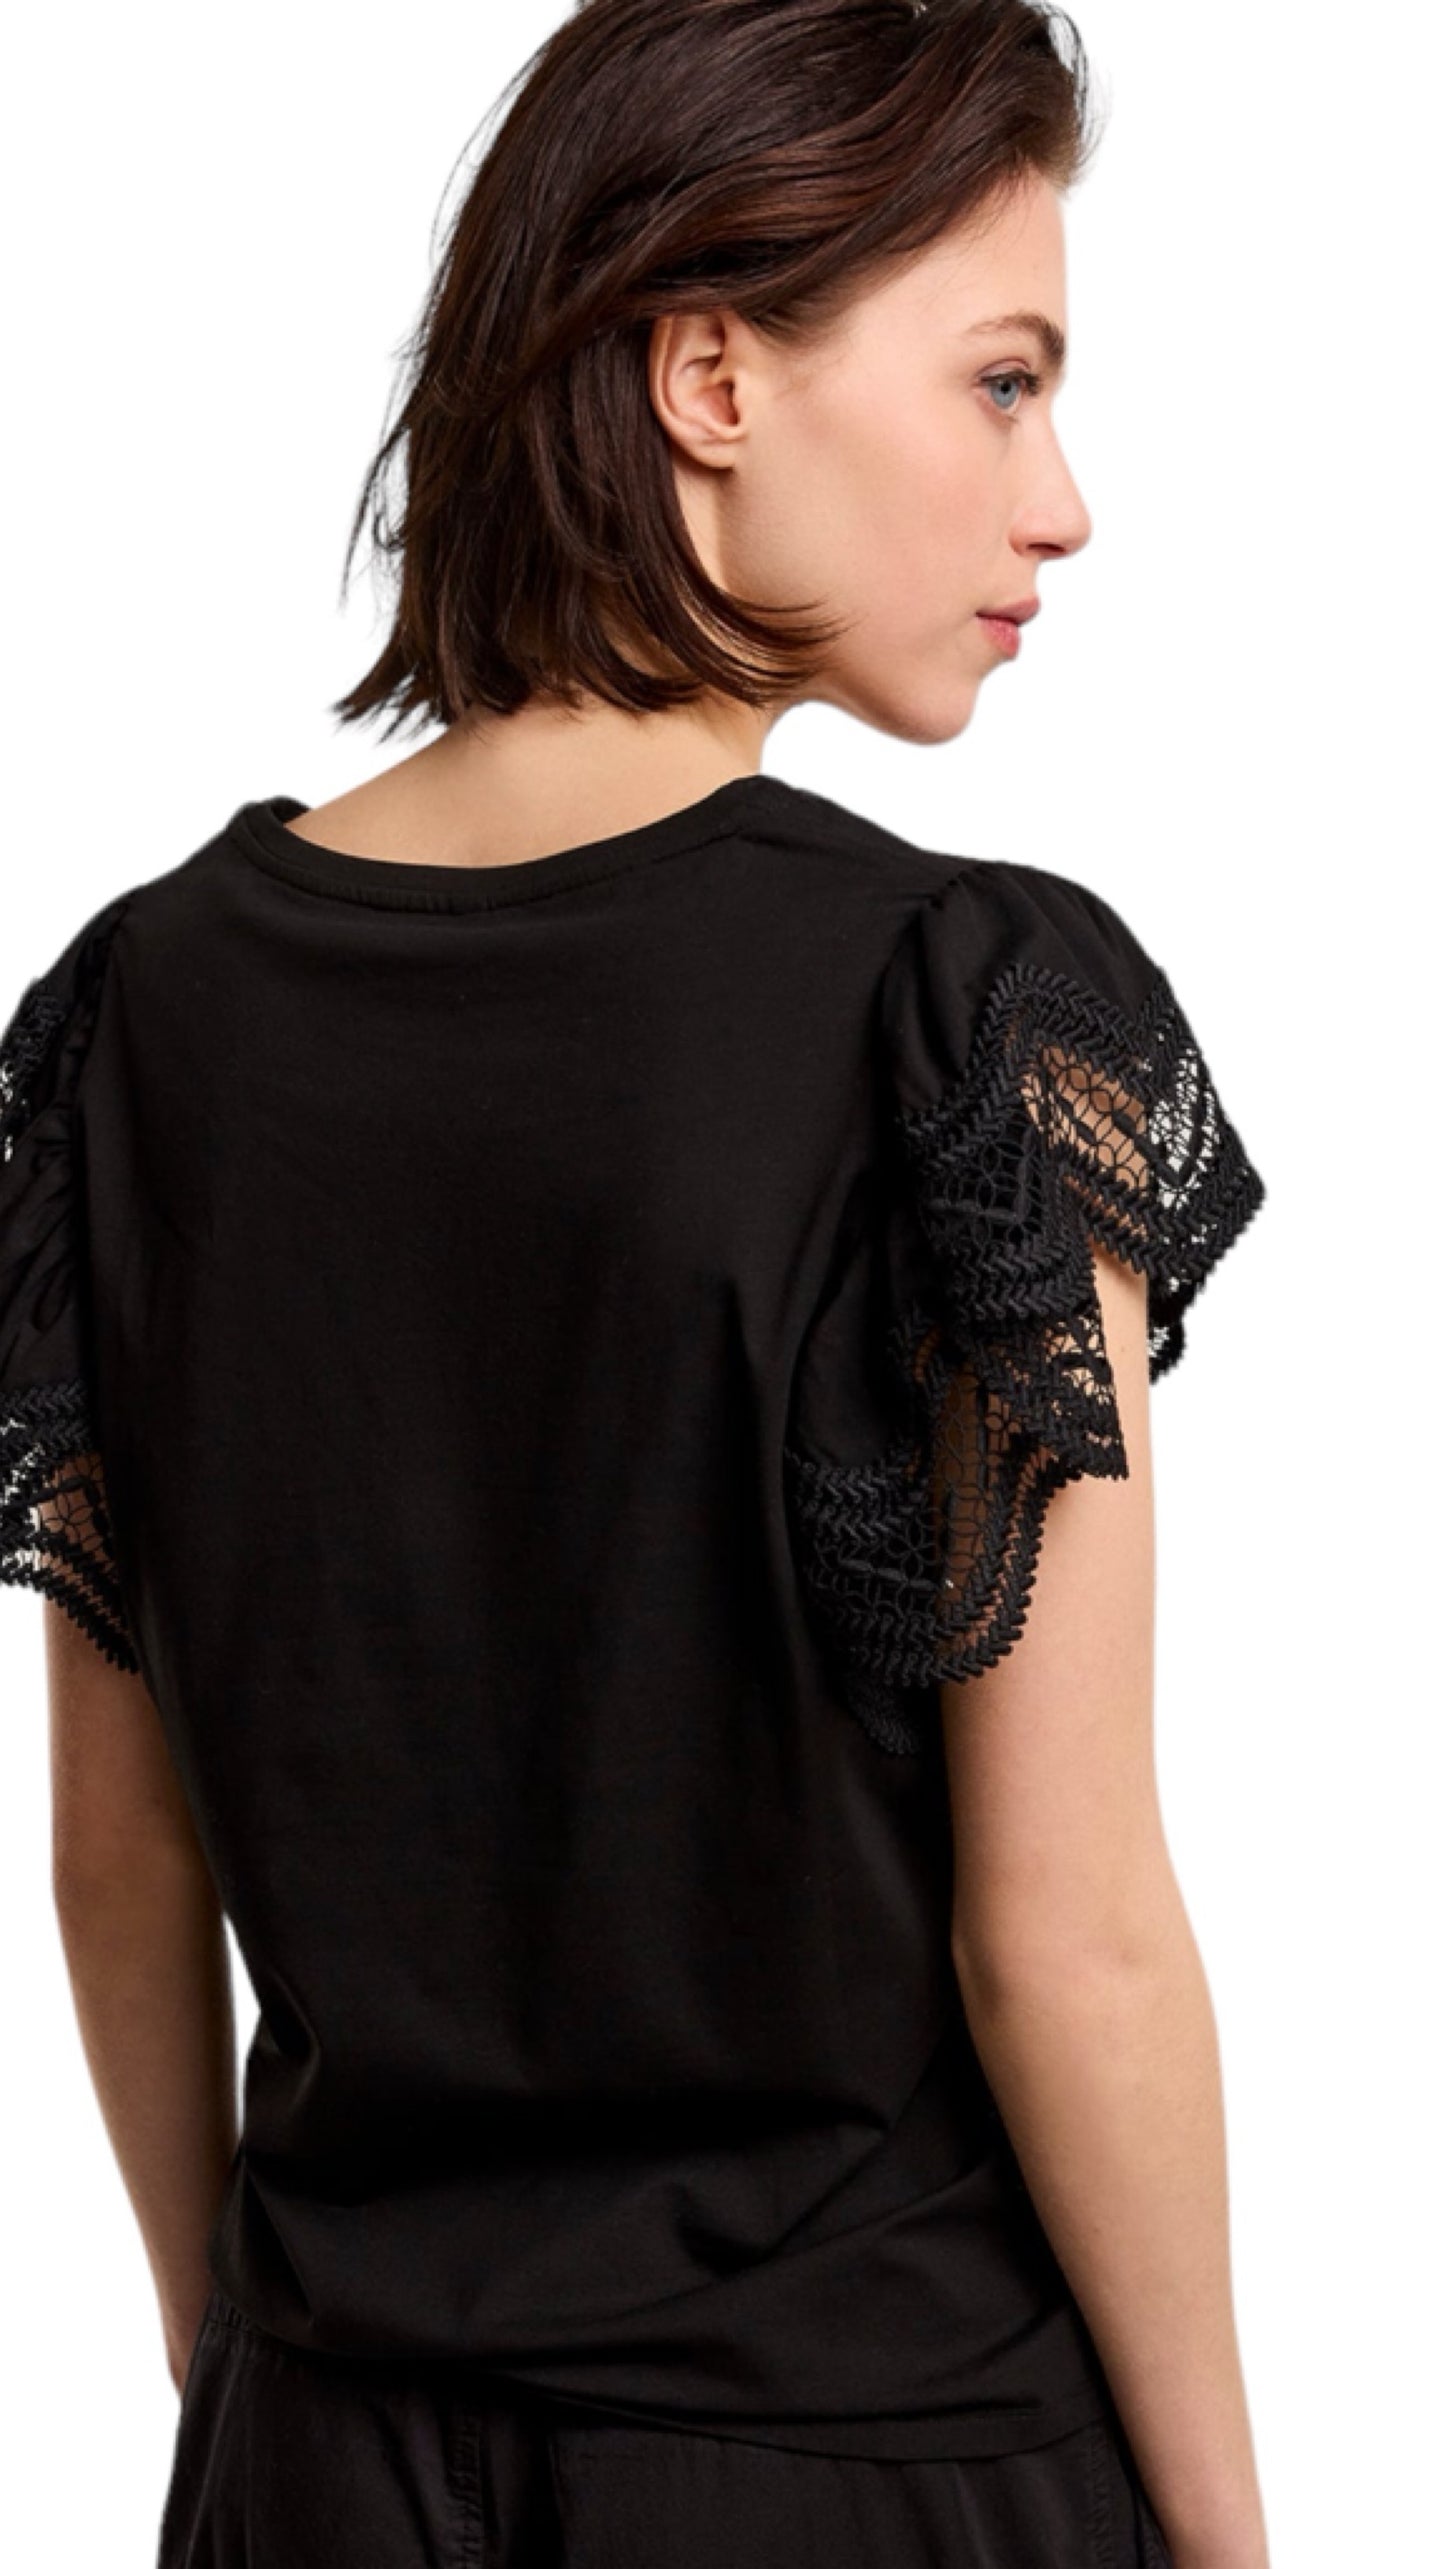 Jersey top tee lace